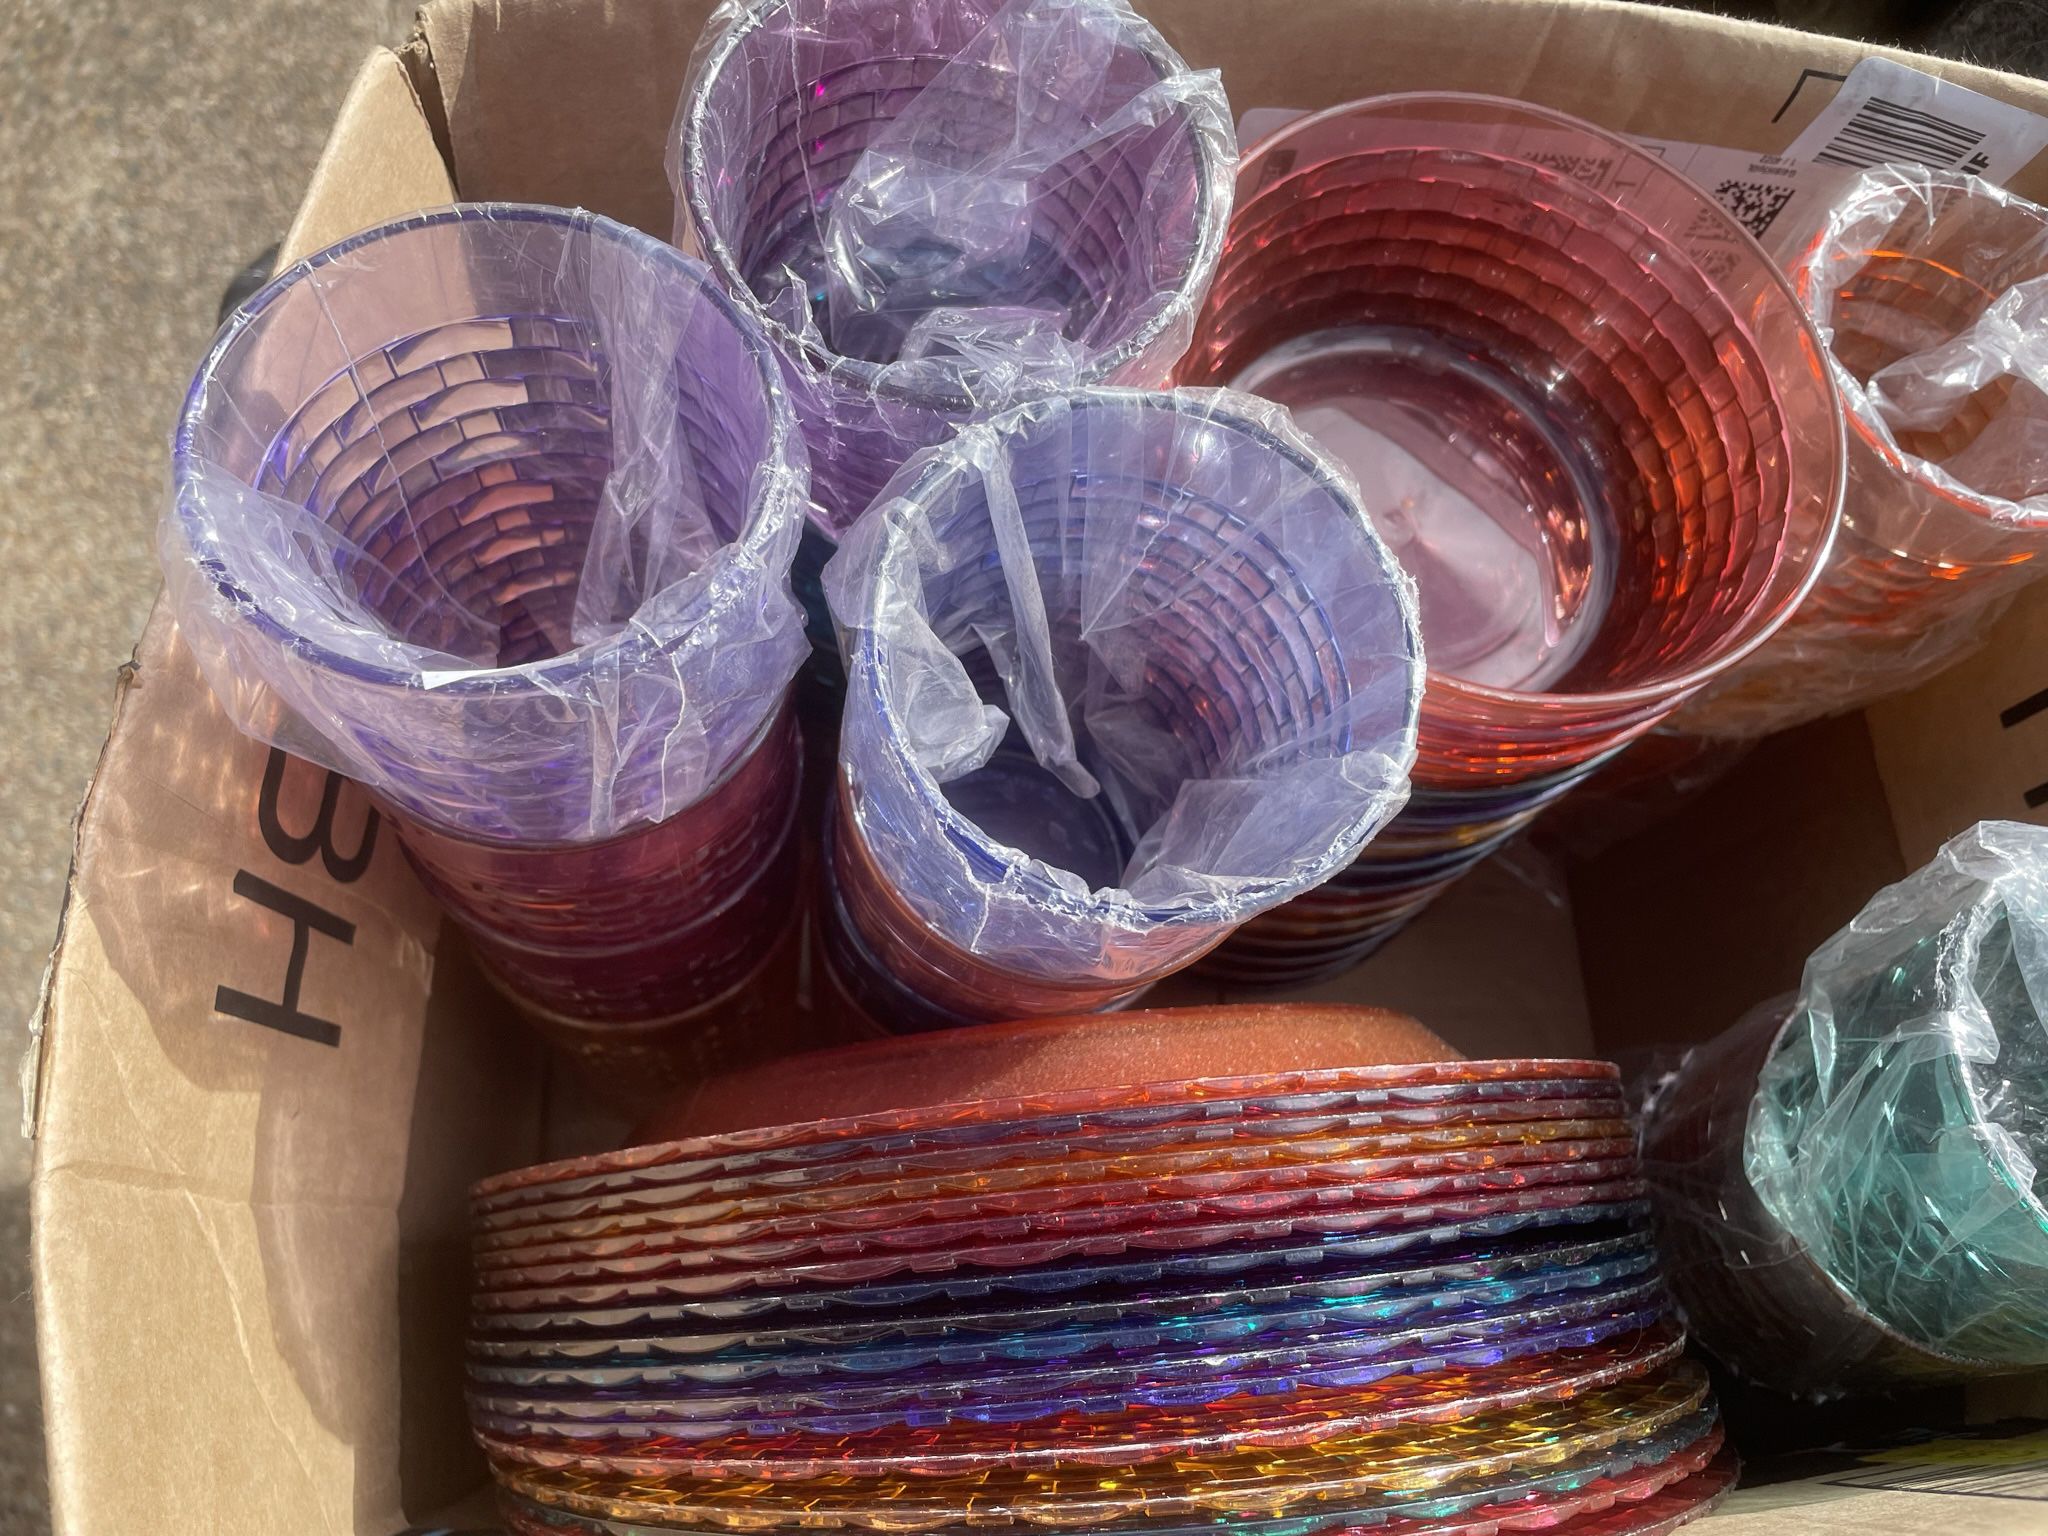 Box Of Colorful Outdoor Plates, Bowls  And Cups 